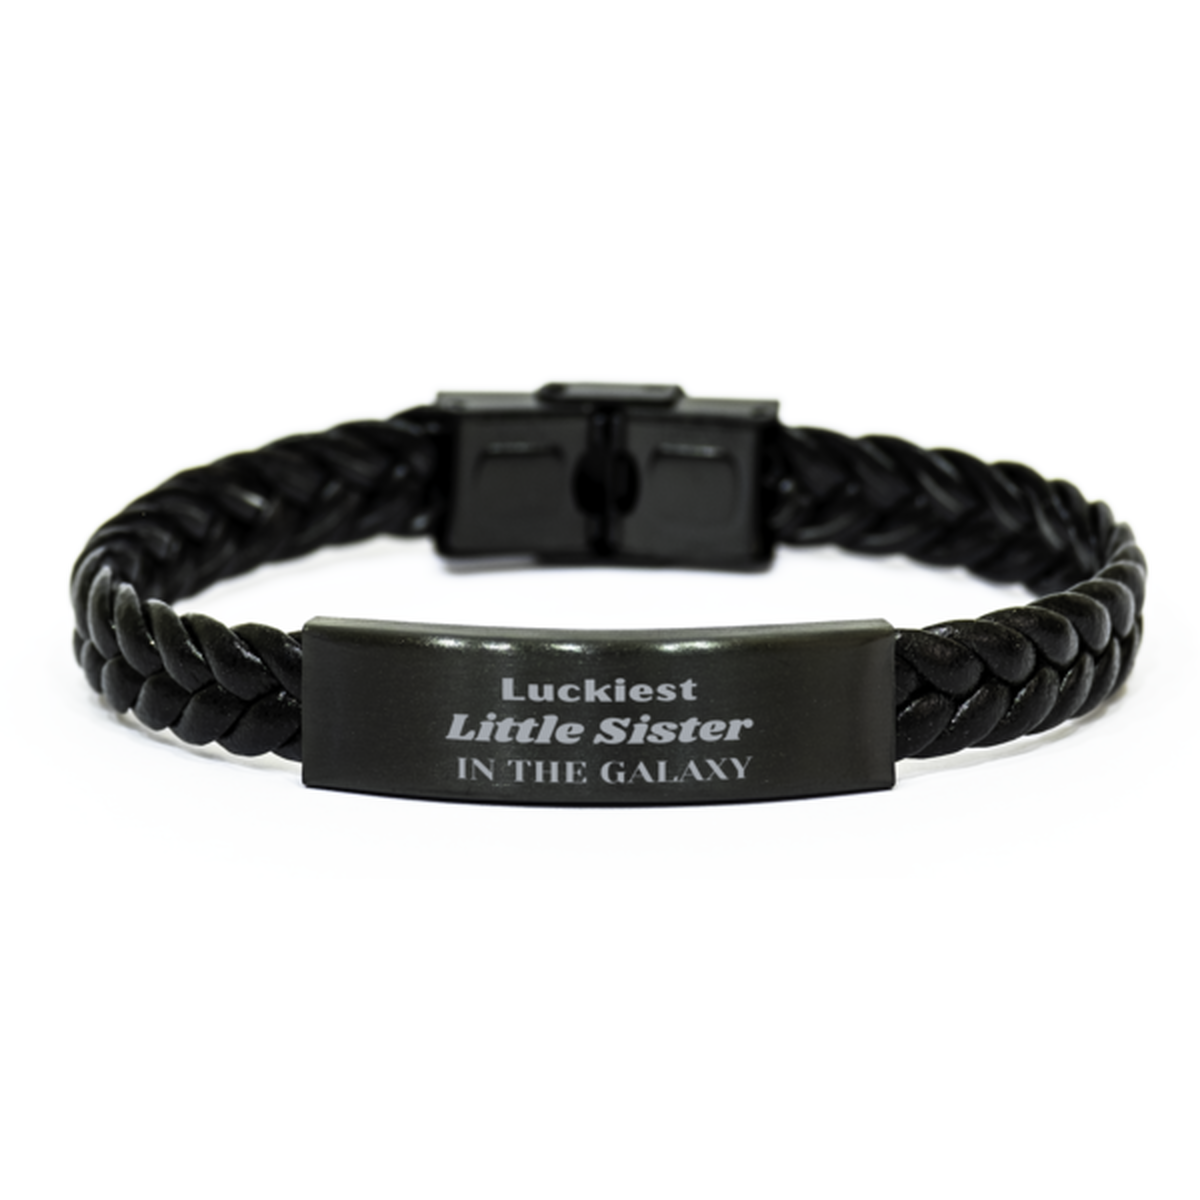 Luckiest Little Sister in the Galaxy, To My Little Sister Engraved Gifts, Christmas Little Sister Braided Leather Bracelet Gifts, X-mas Birthday Unique Gifts For Little Sister Men Women